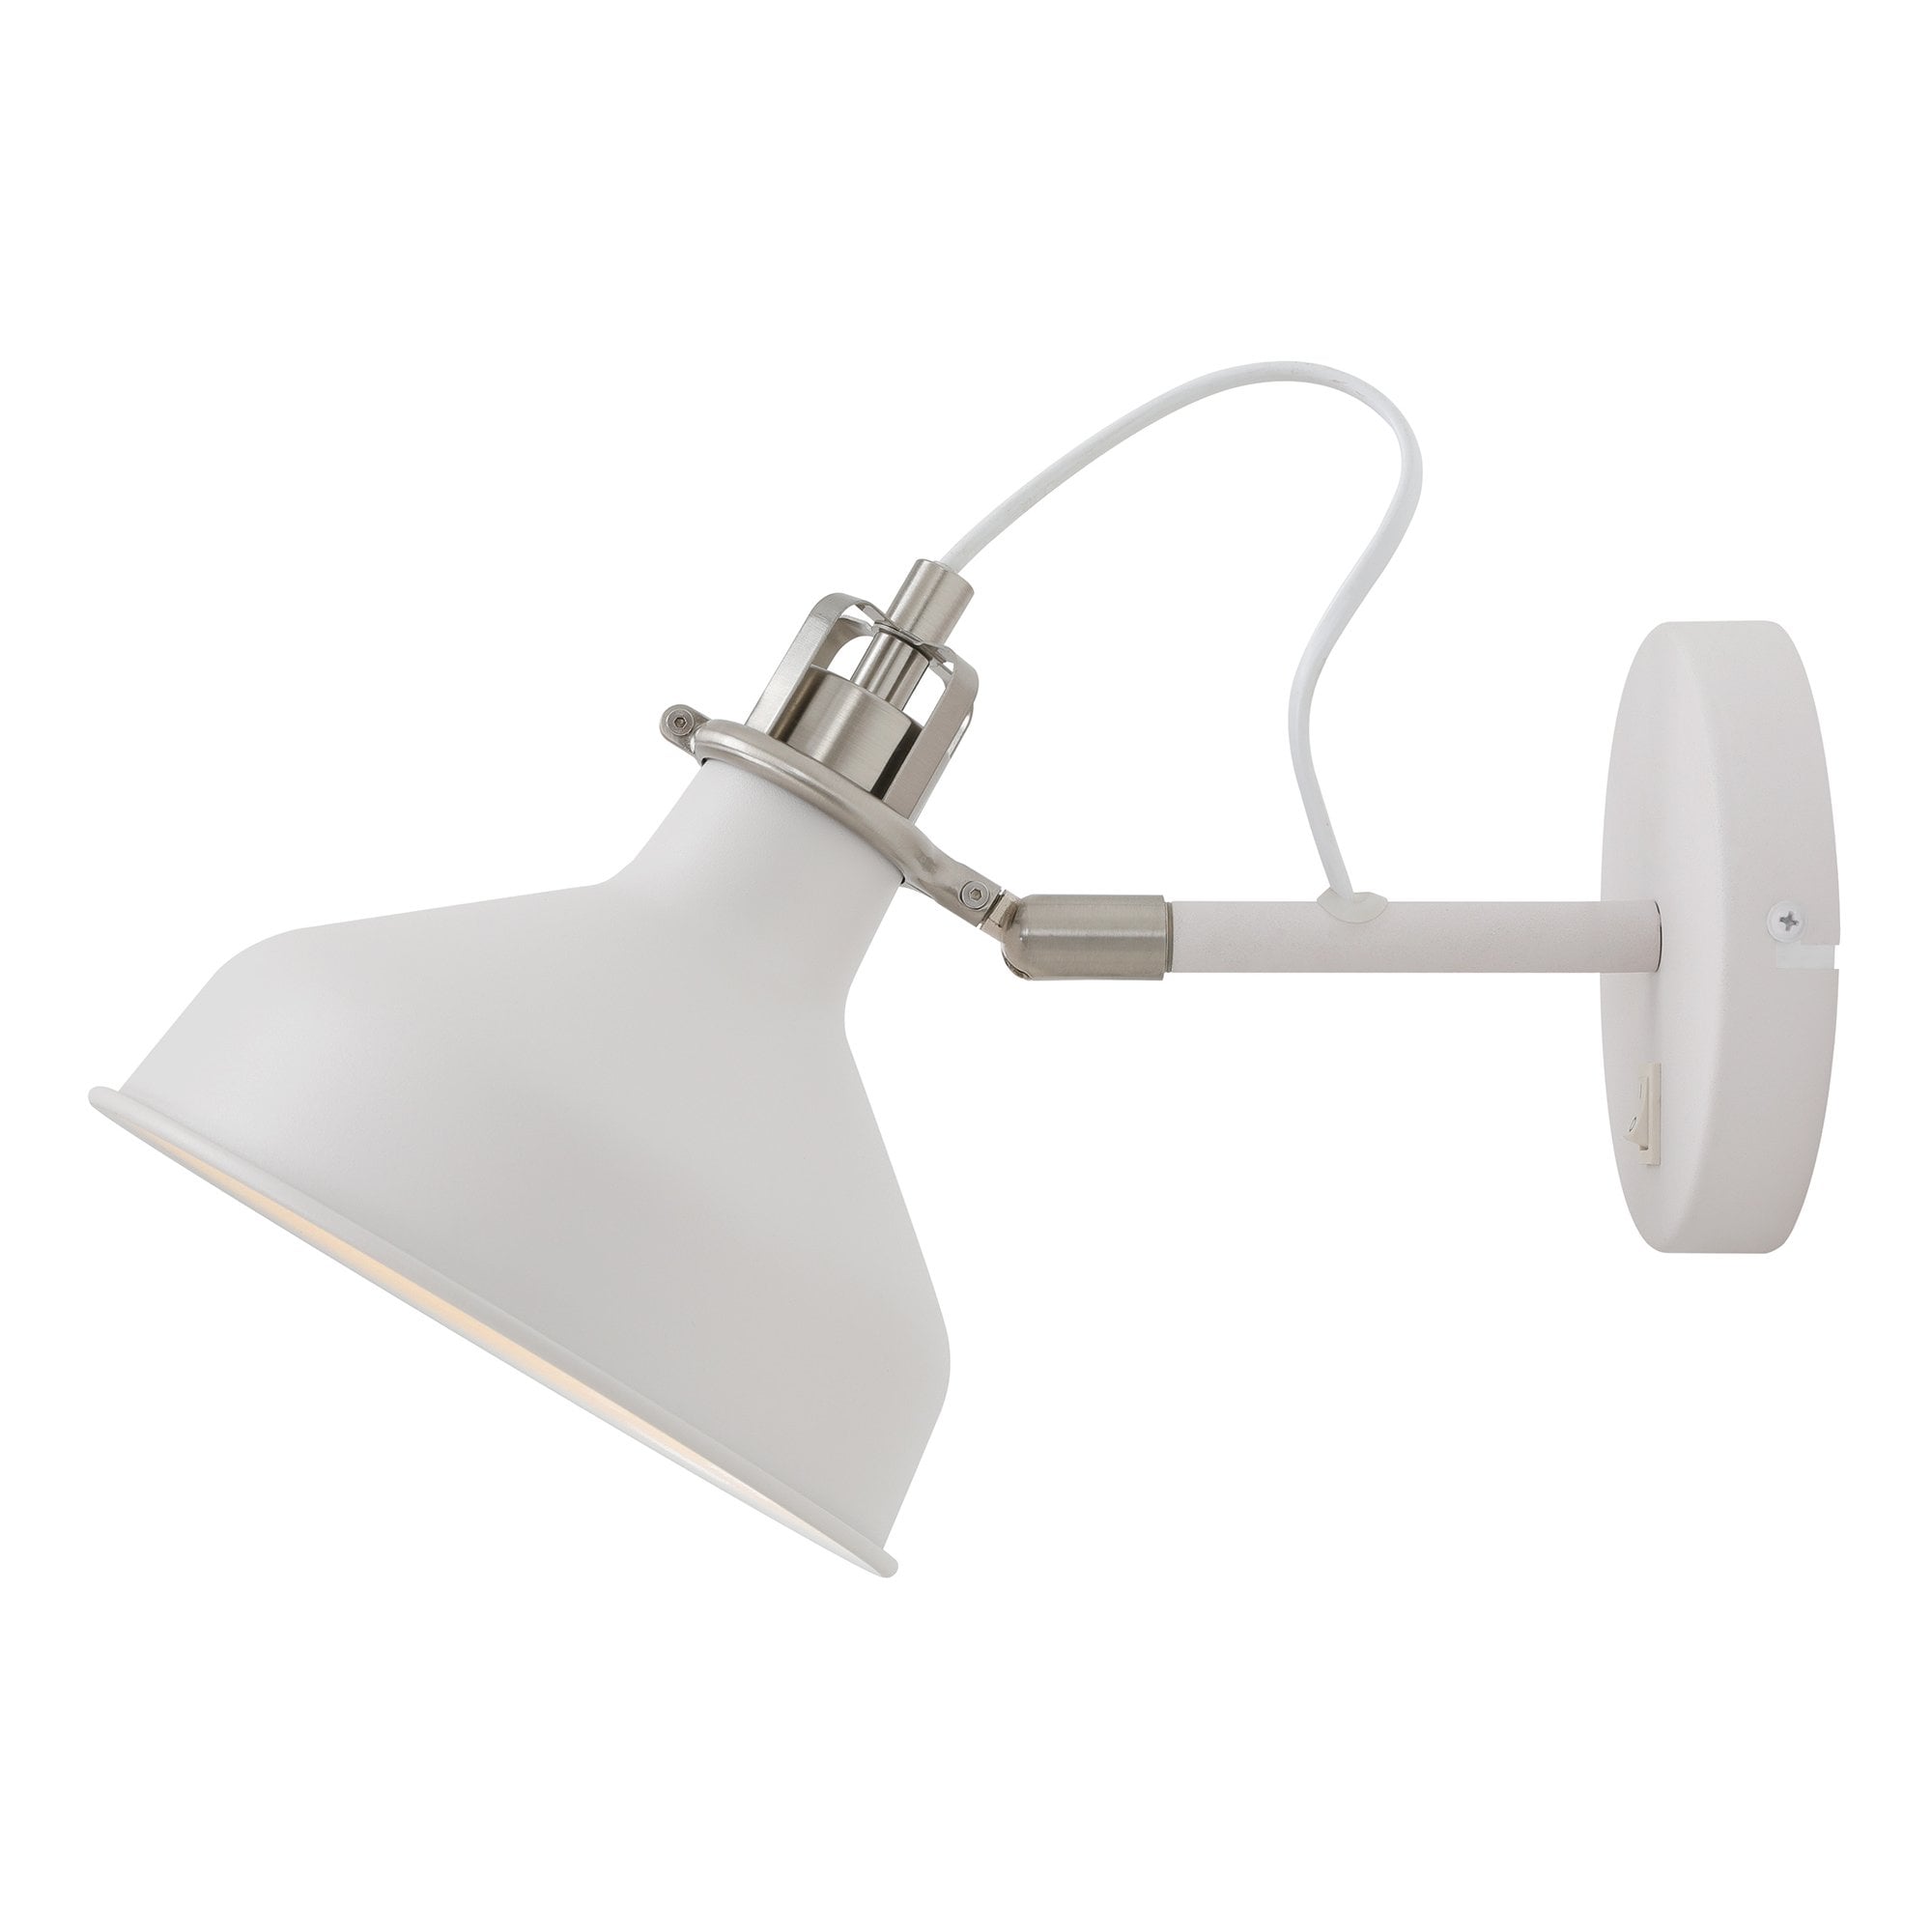 Adjustable Wall Lamp Switched, 1 x E27, Sand White/Satin Nickel/White